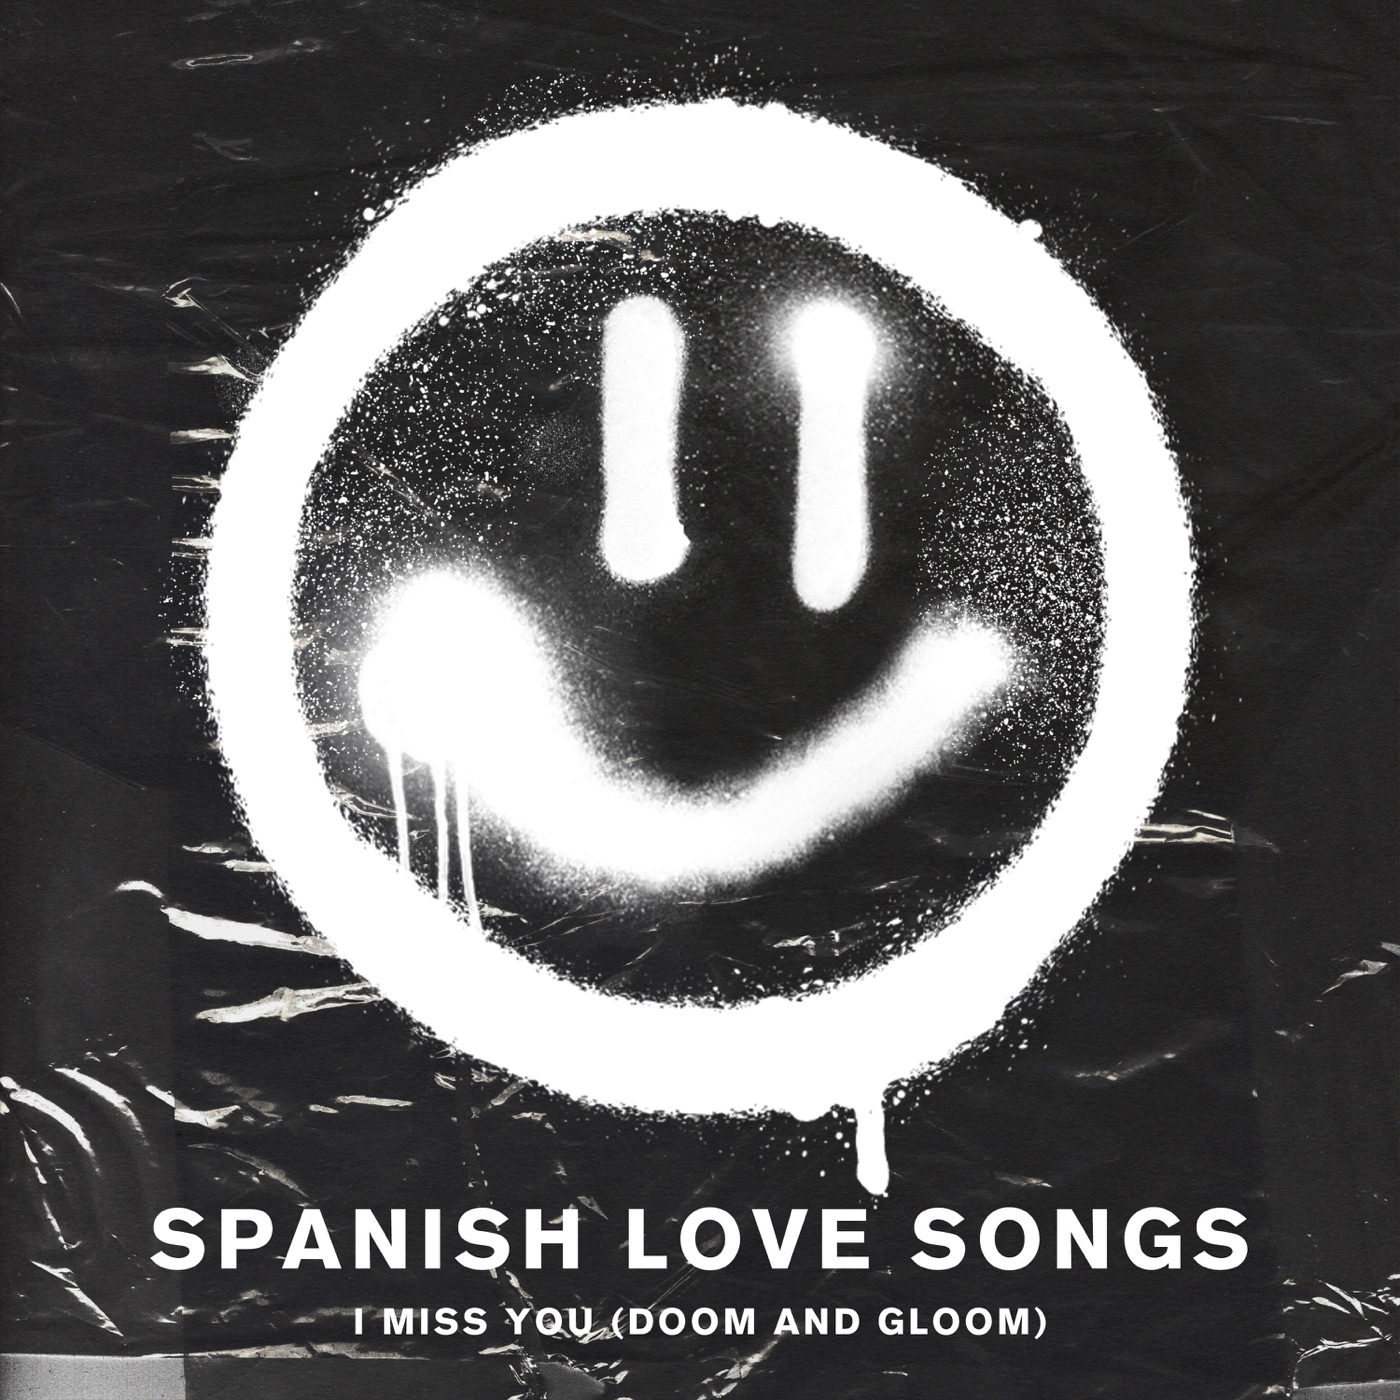 I Miss You (Doom and Gloom) by Spanish Love Songs